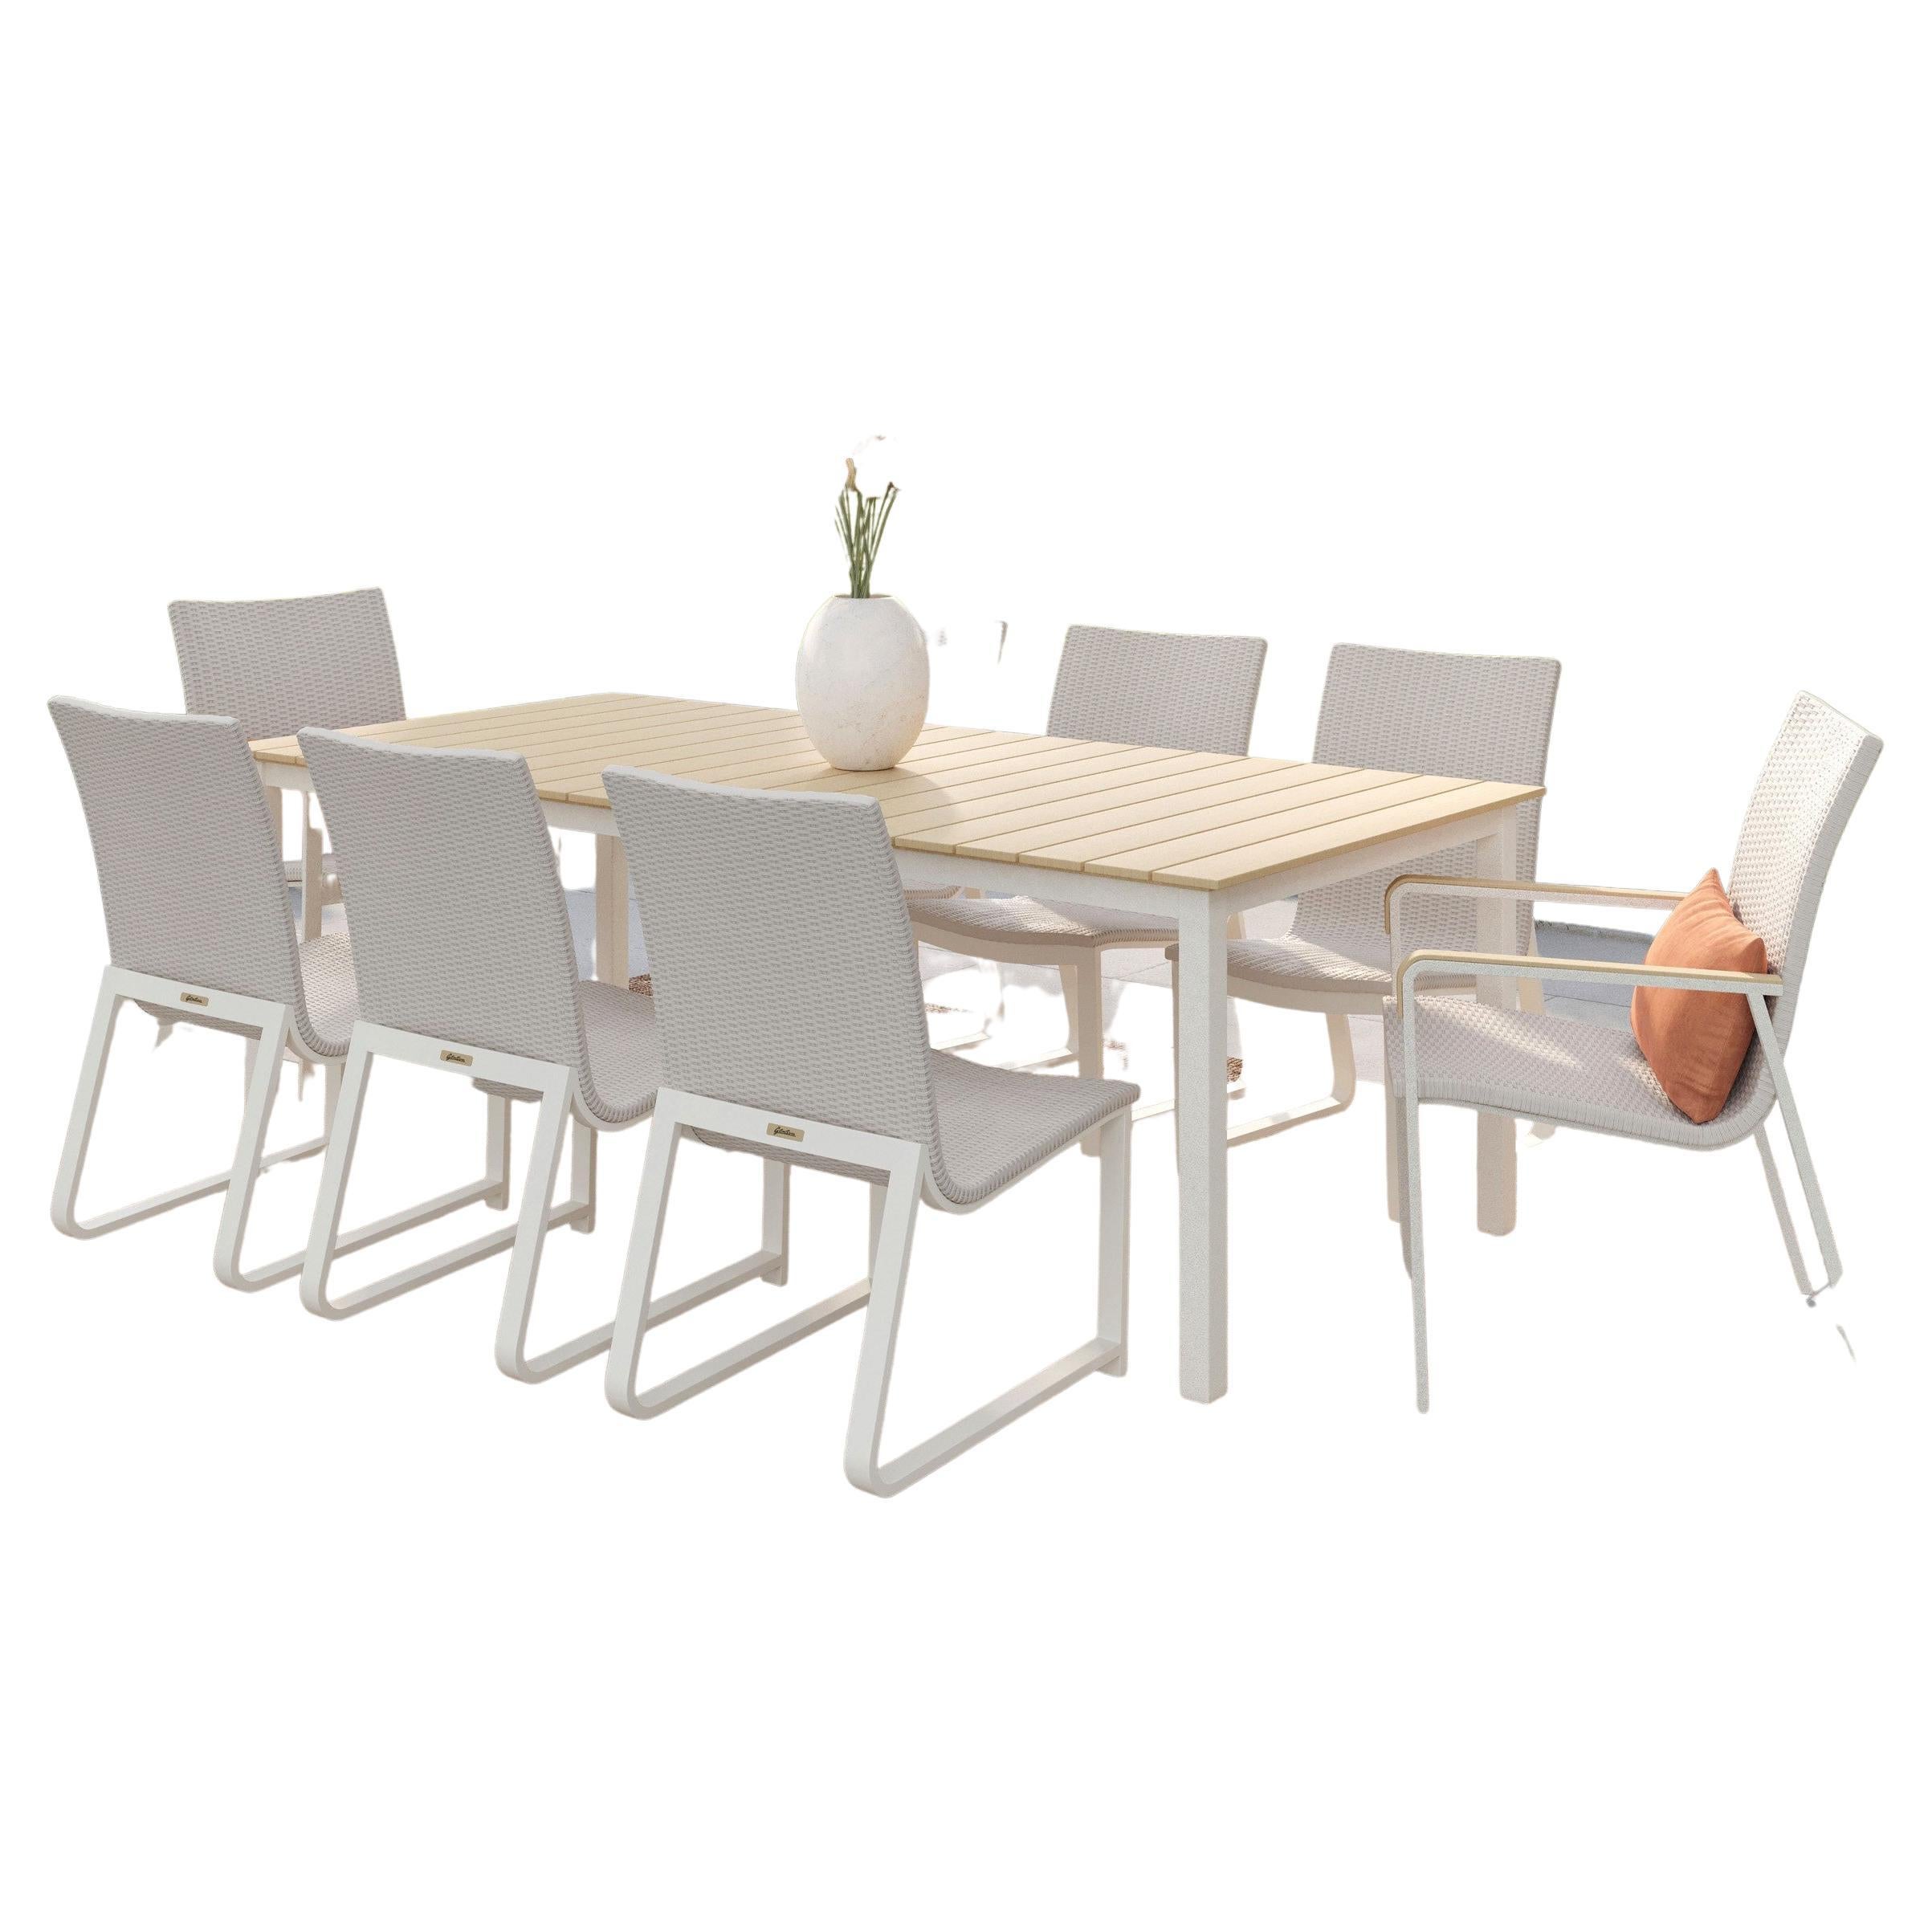 New Gensun Casual Ventura 9 Piece Cast Aluminum and Weave Table and Chairs Set  